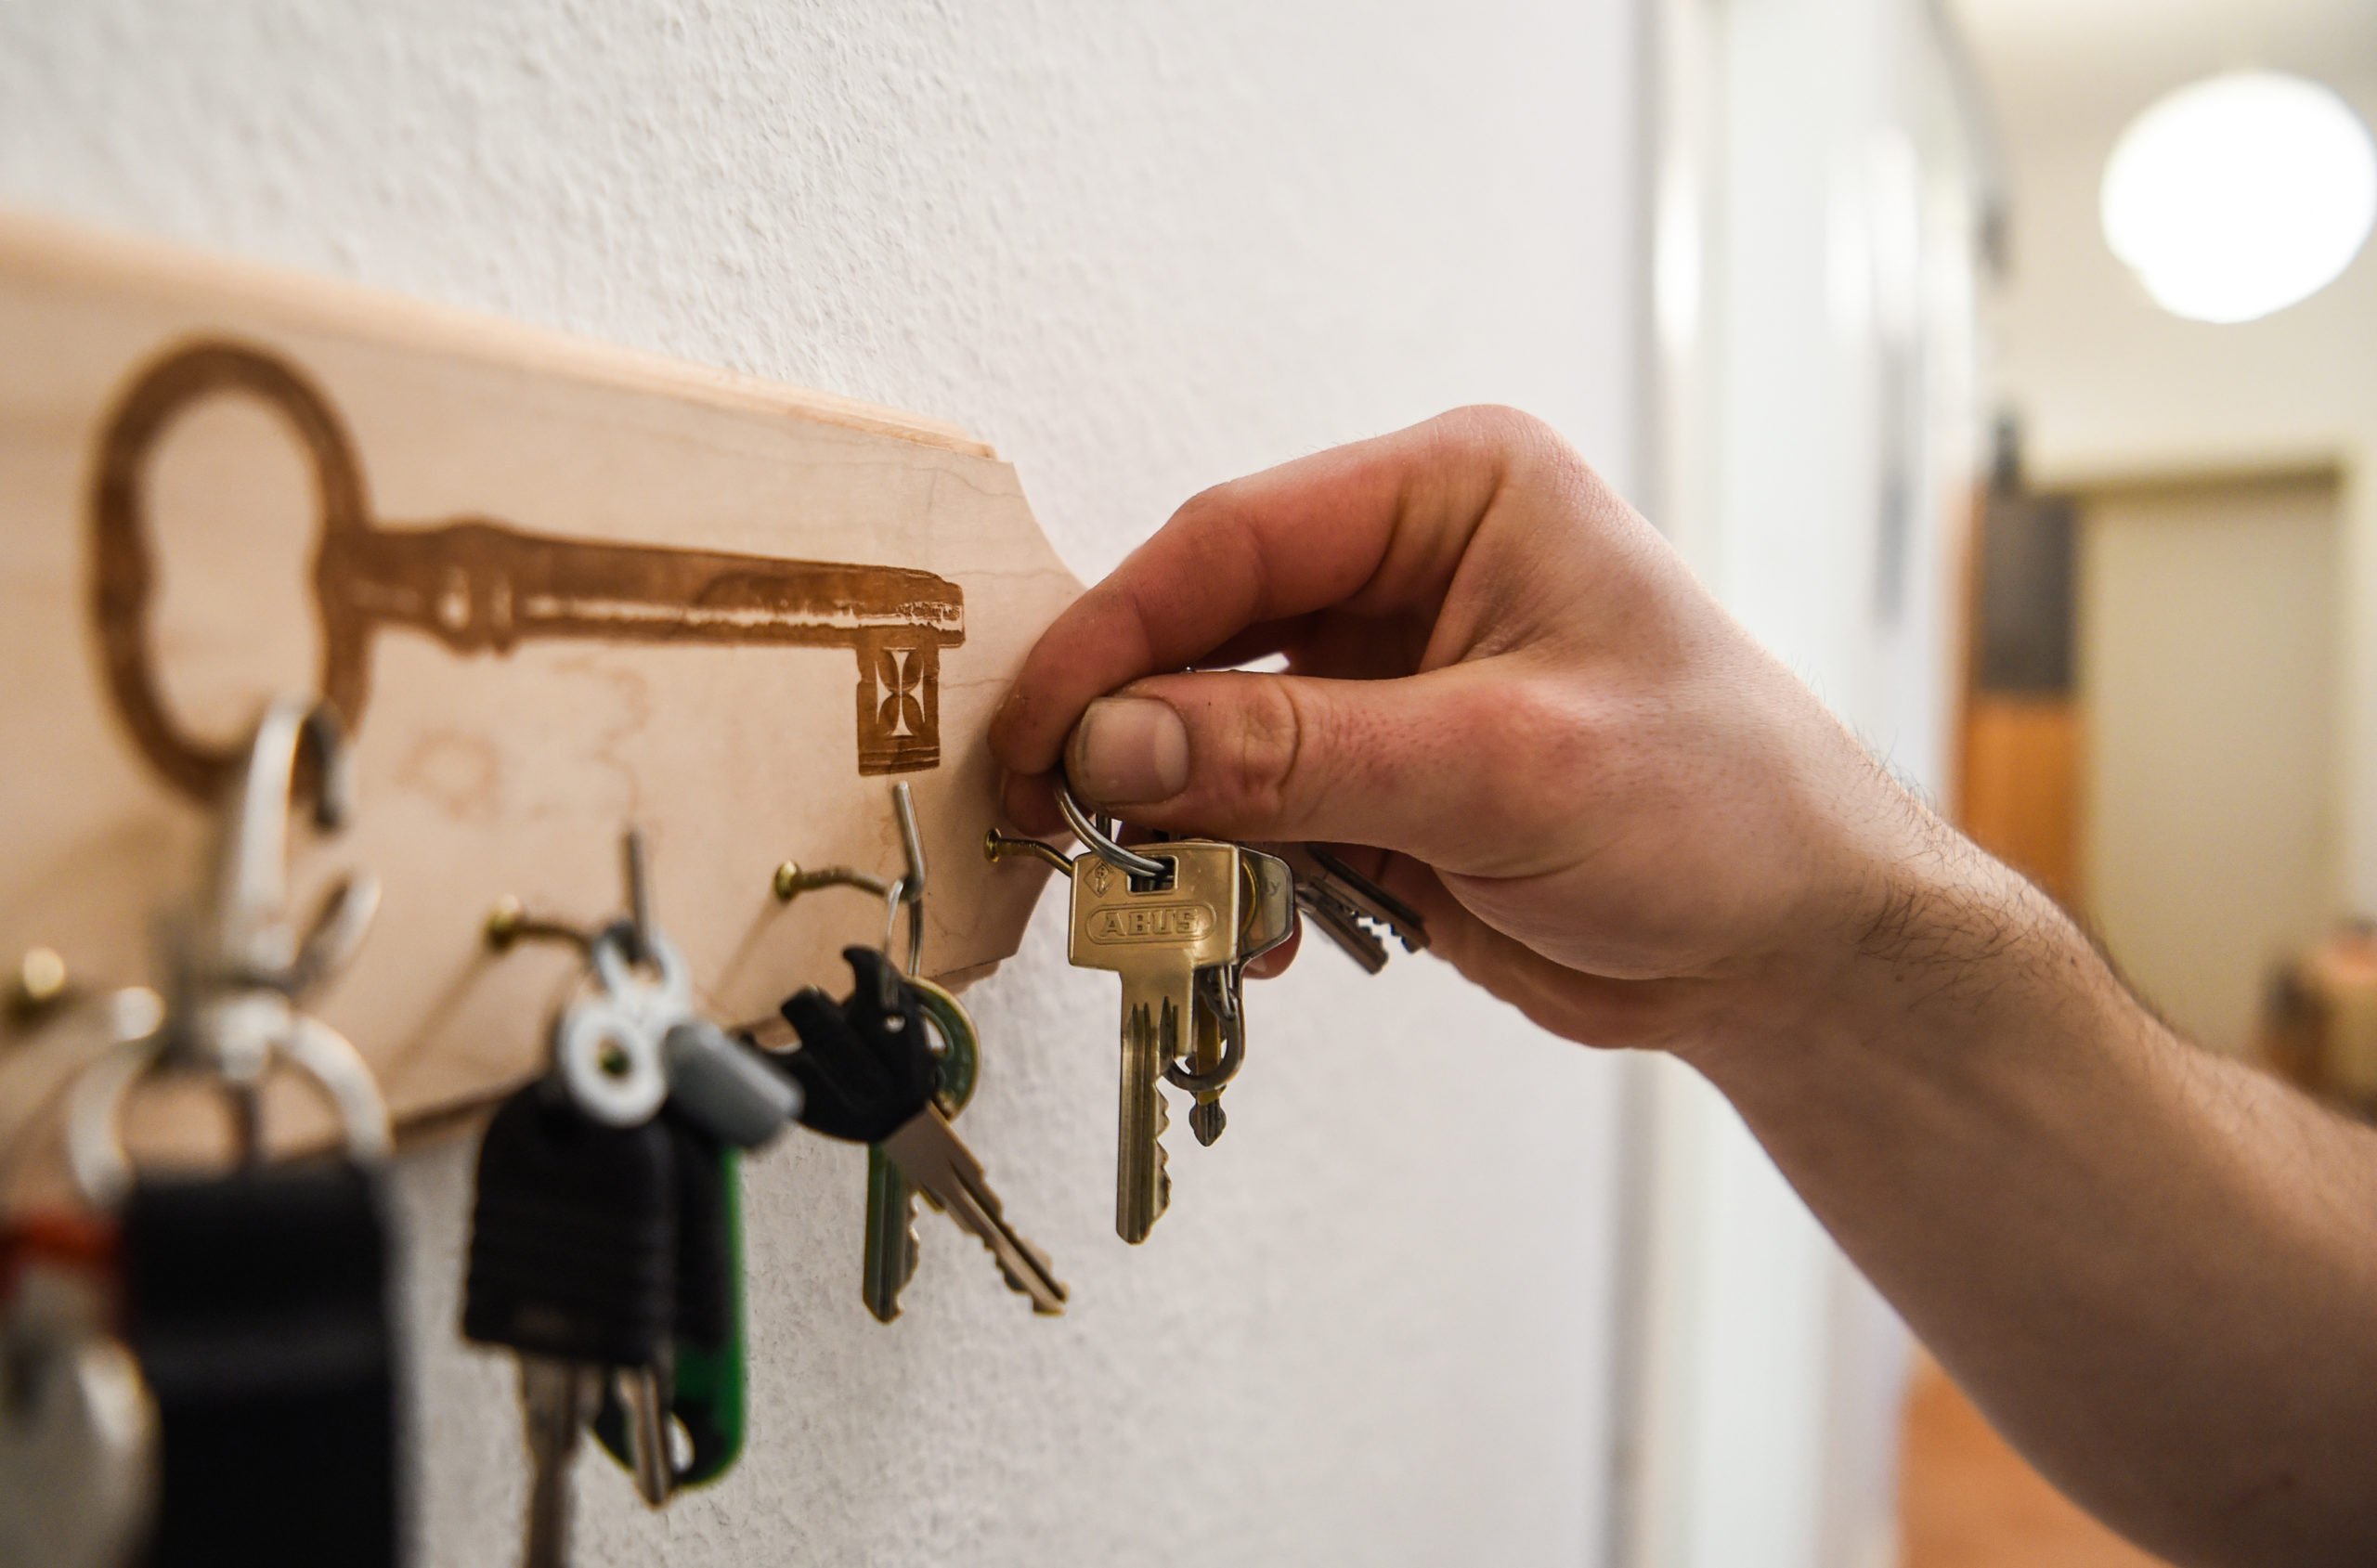 A man hangs up his keys in a Berlin apartment